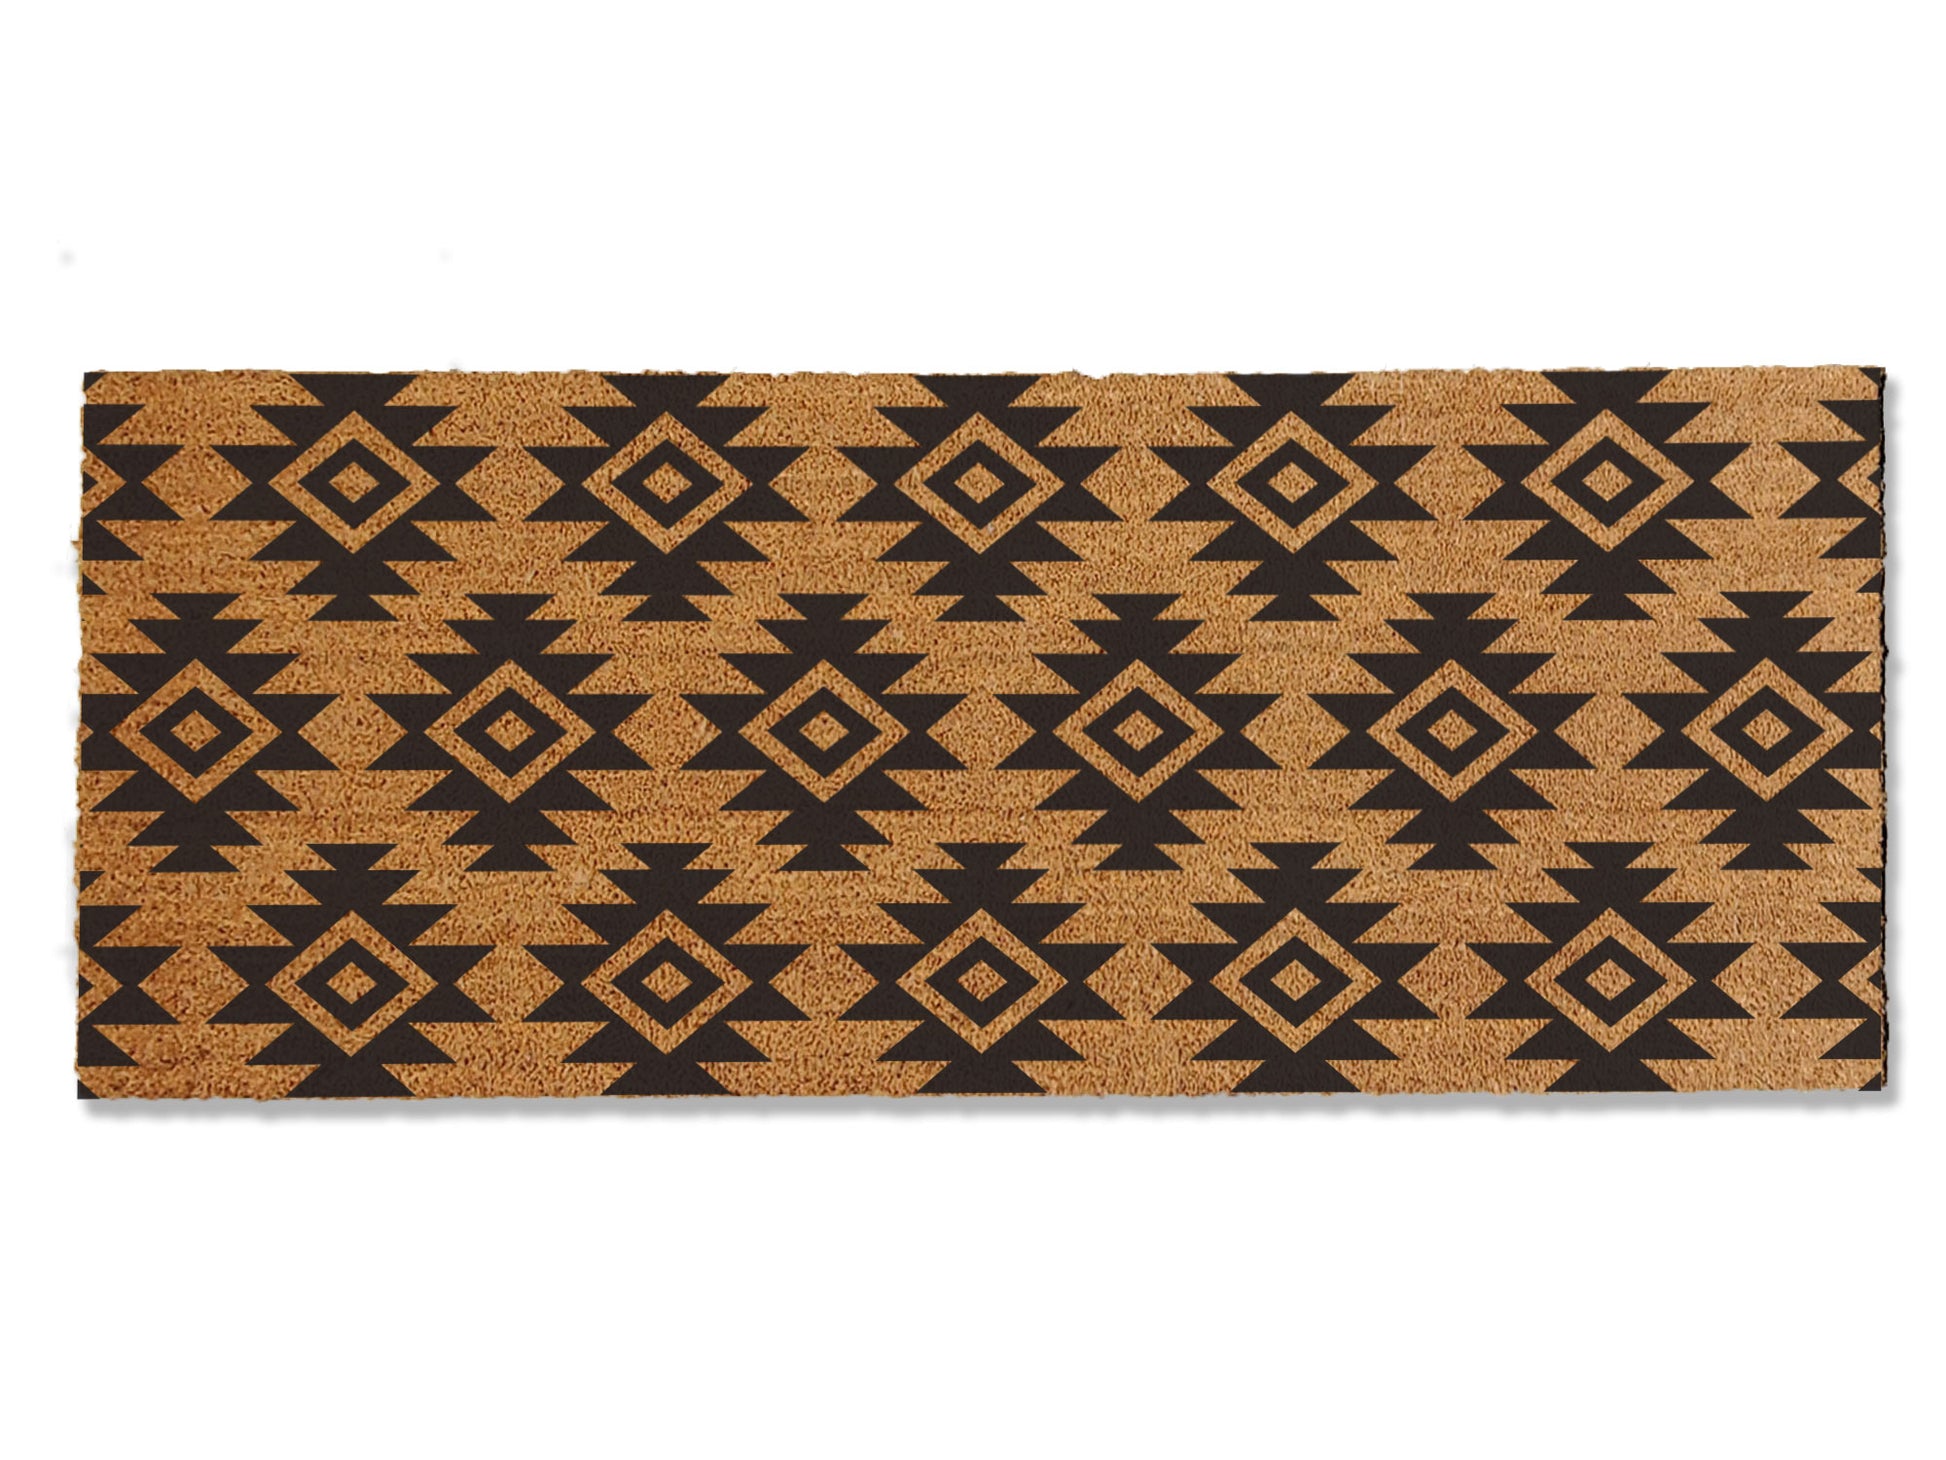 A coir doormat that is 24 inches by 60 inches and has a geometric aztec print painted on it.